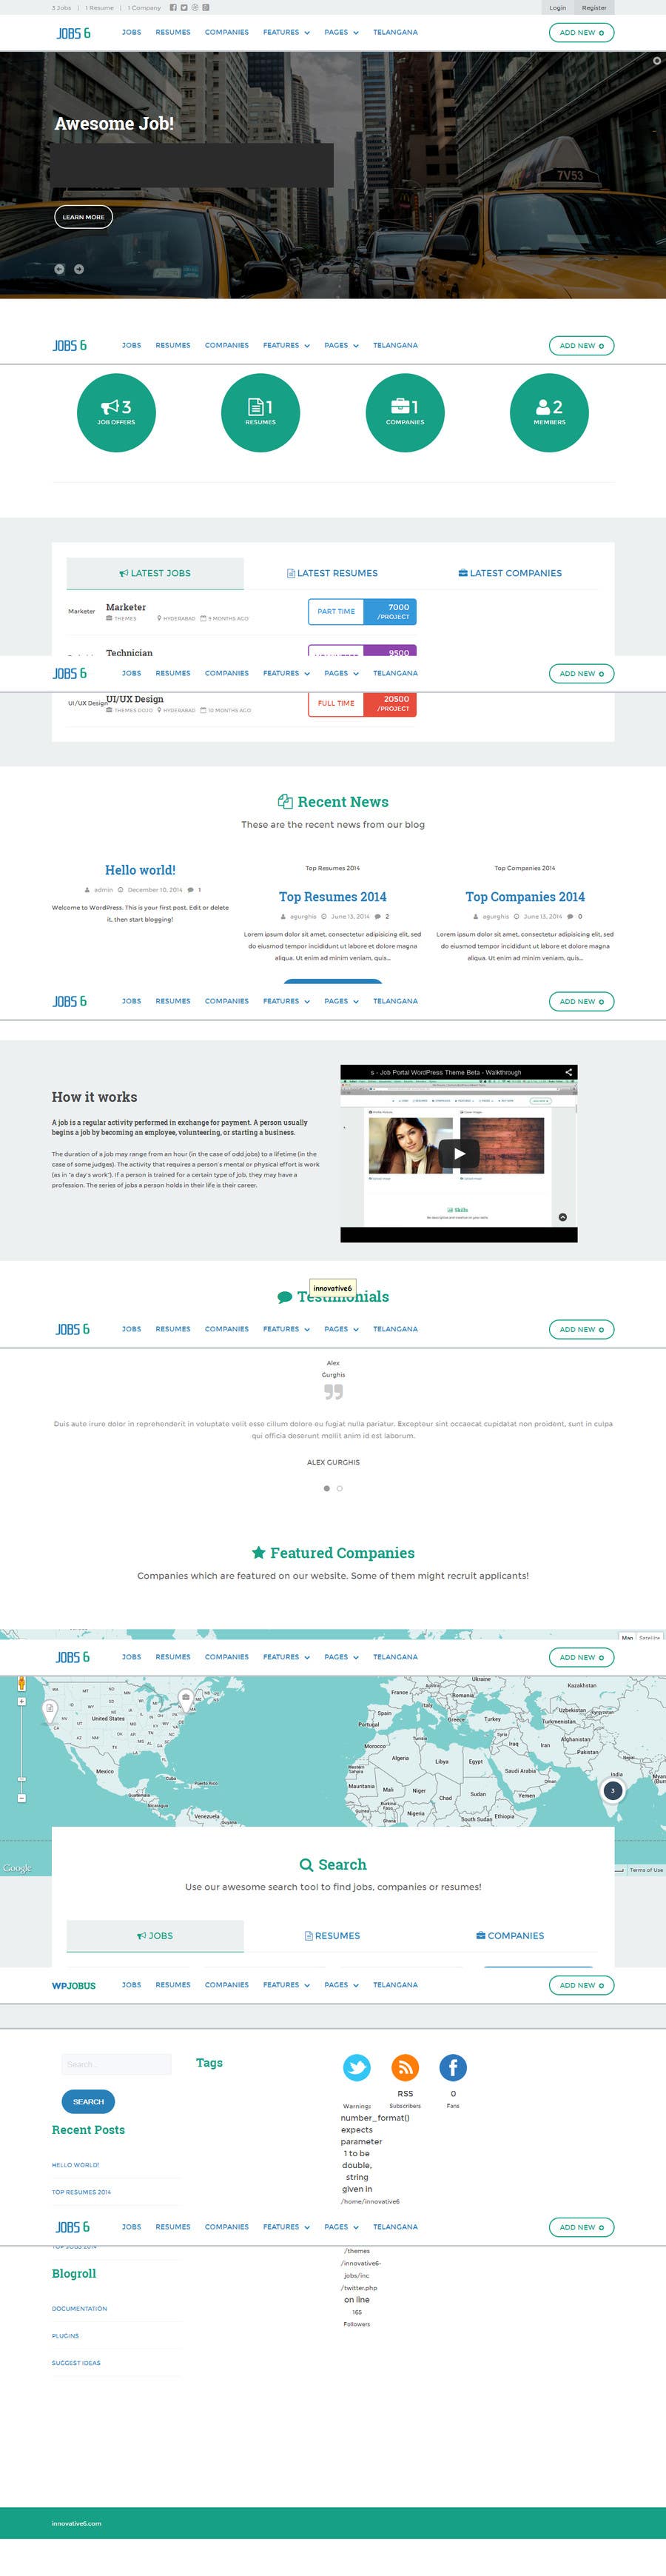 Contest Entry #16 for                                                 Design a Website Mockup for a Job Search Engine
                                            